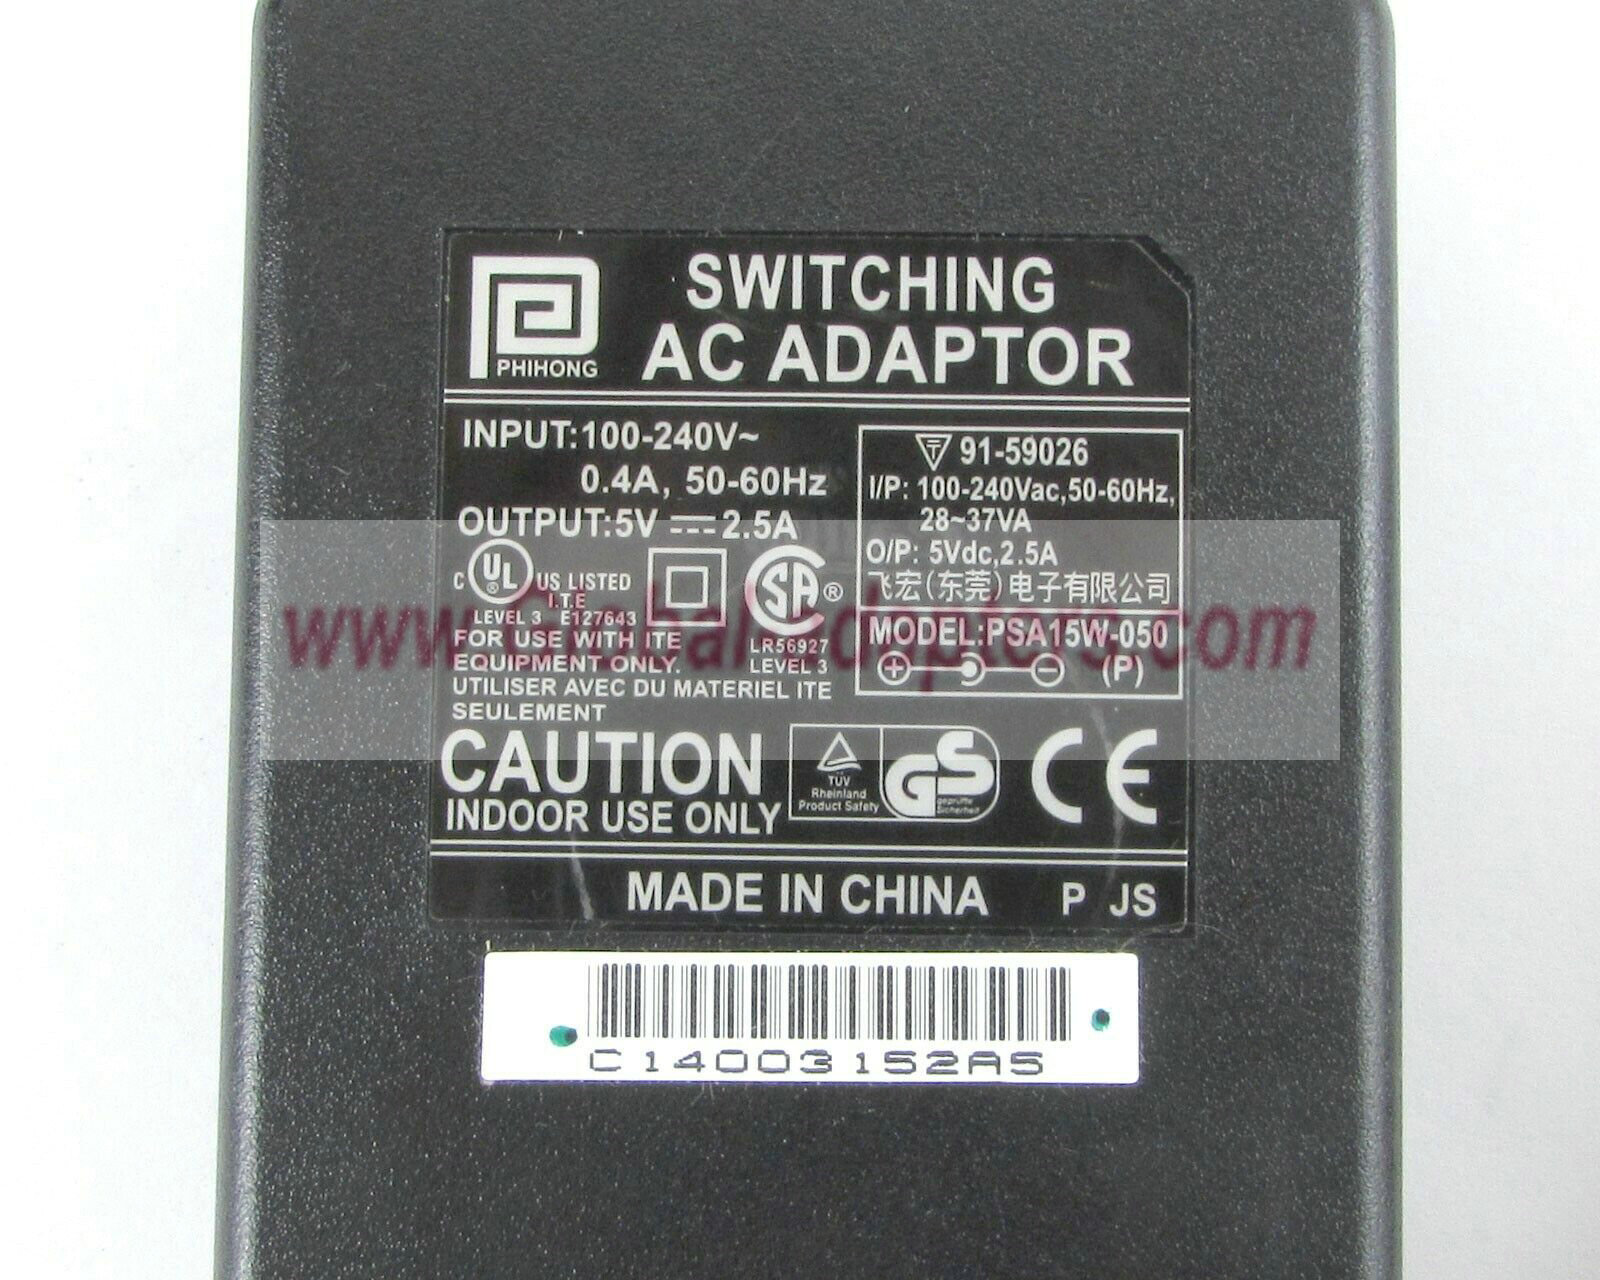 NEW 5V 2.5A Phihong PSA15W-050 Switching AC Adaptor